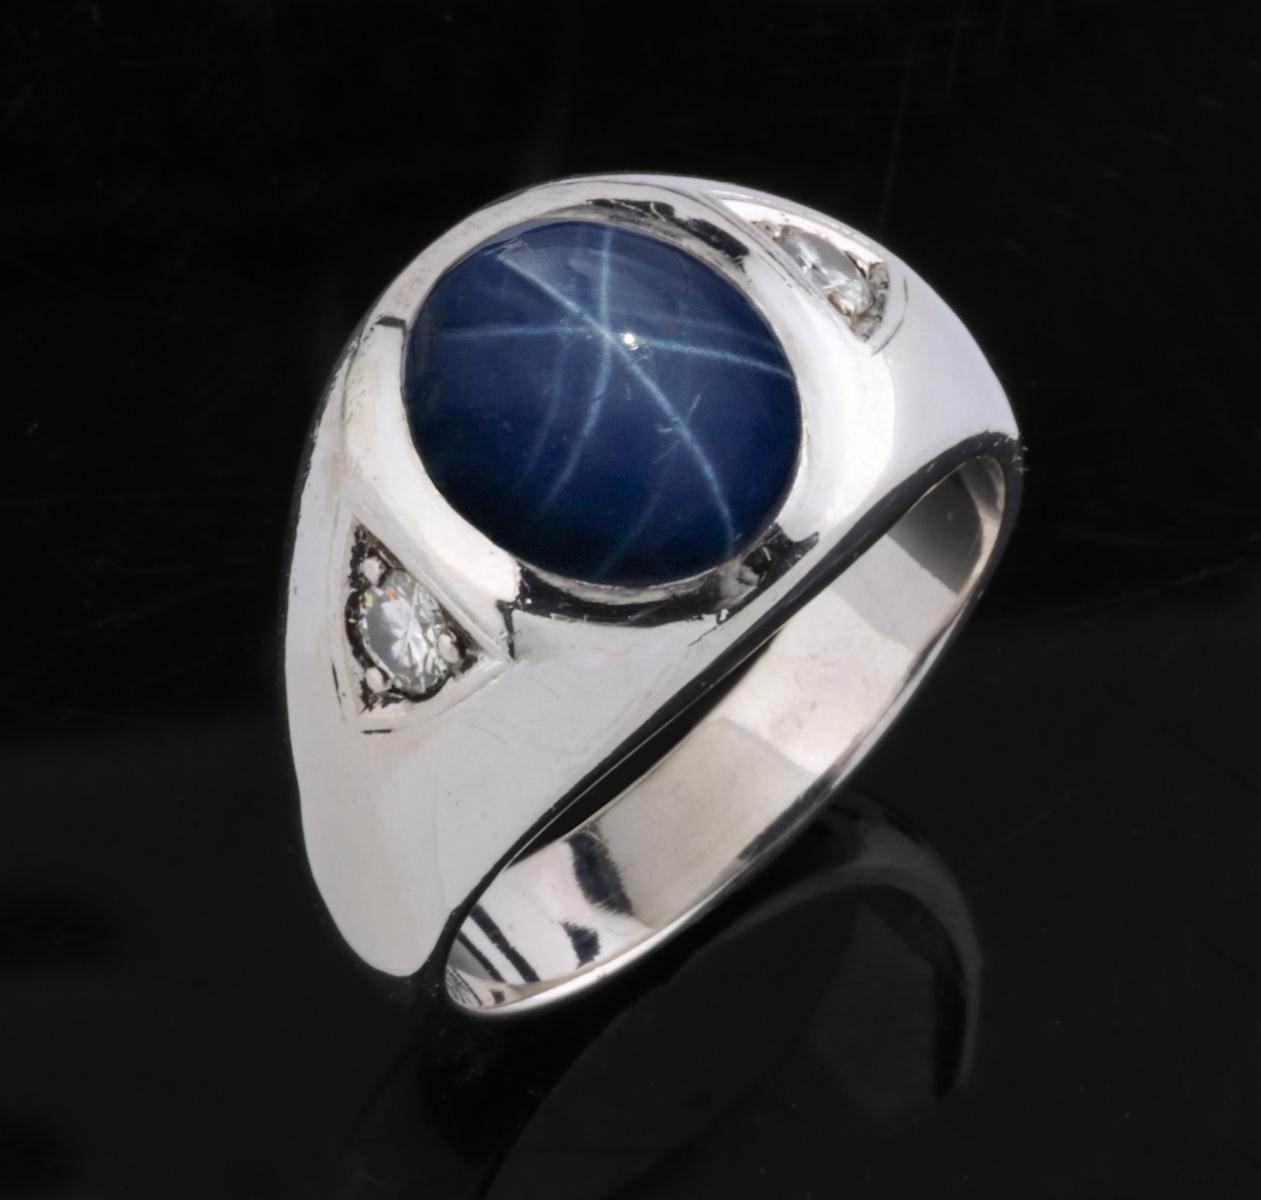 A GENT'S 14K GOLD RING WITH BLUE STAR SAPPHIRE